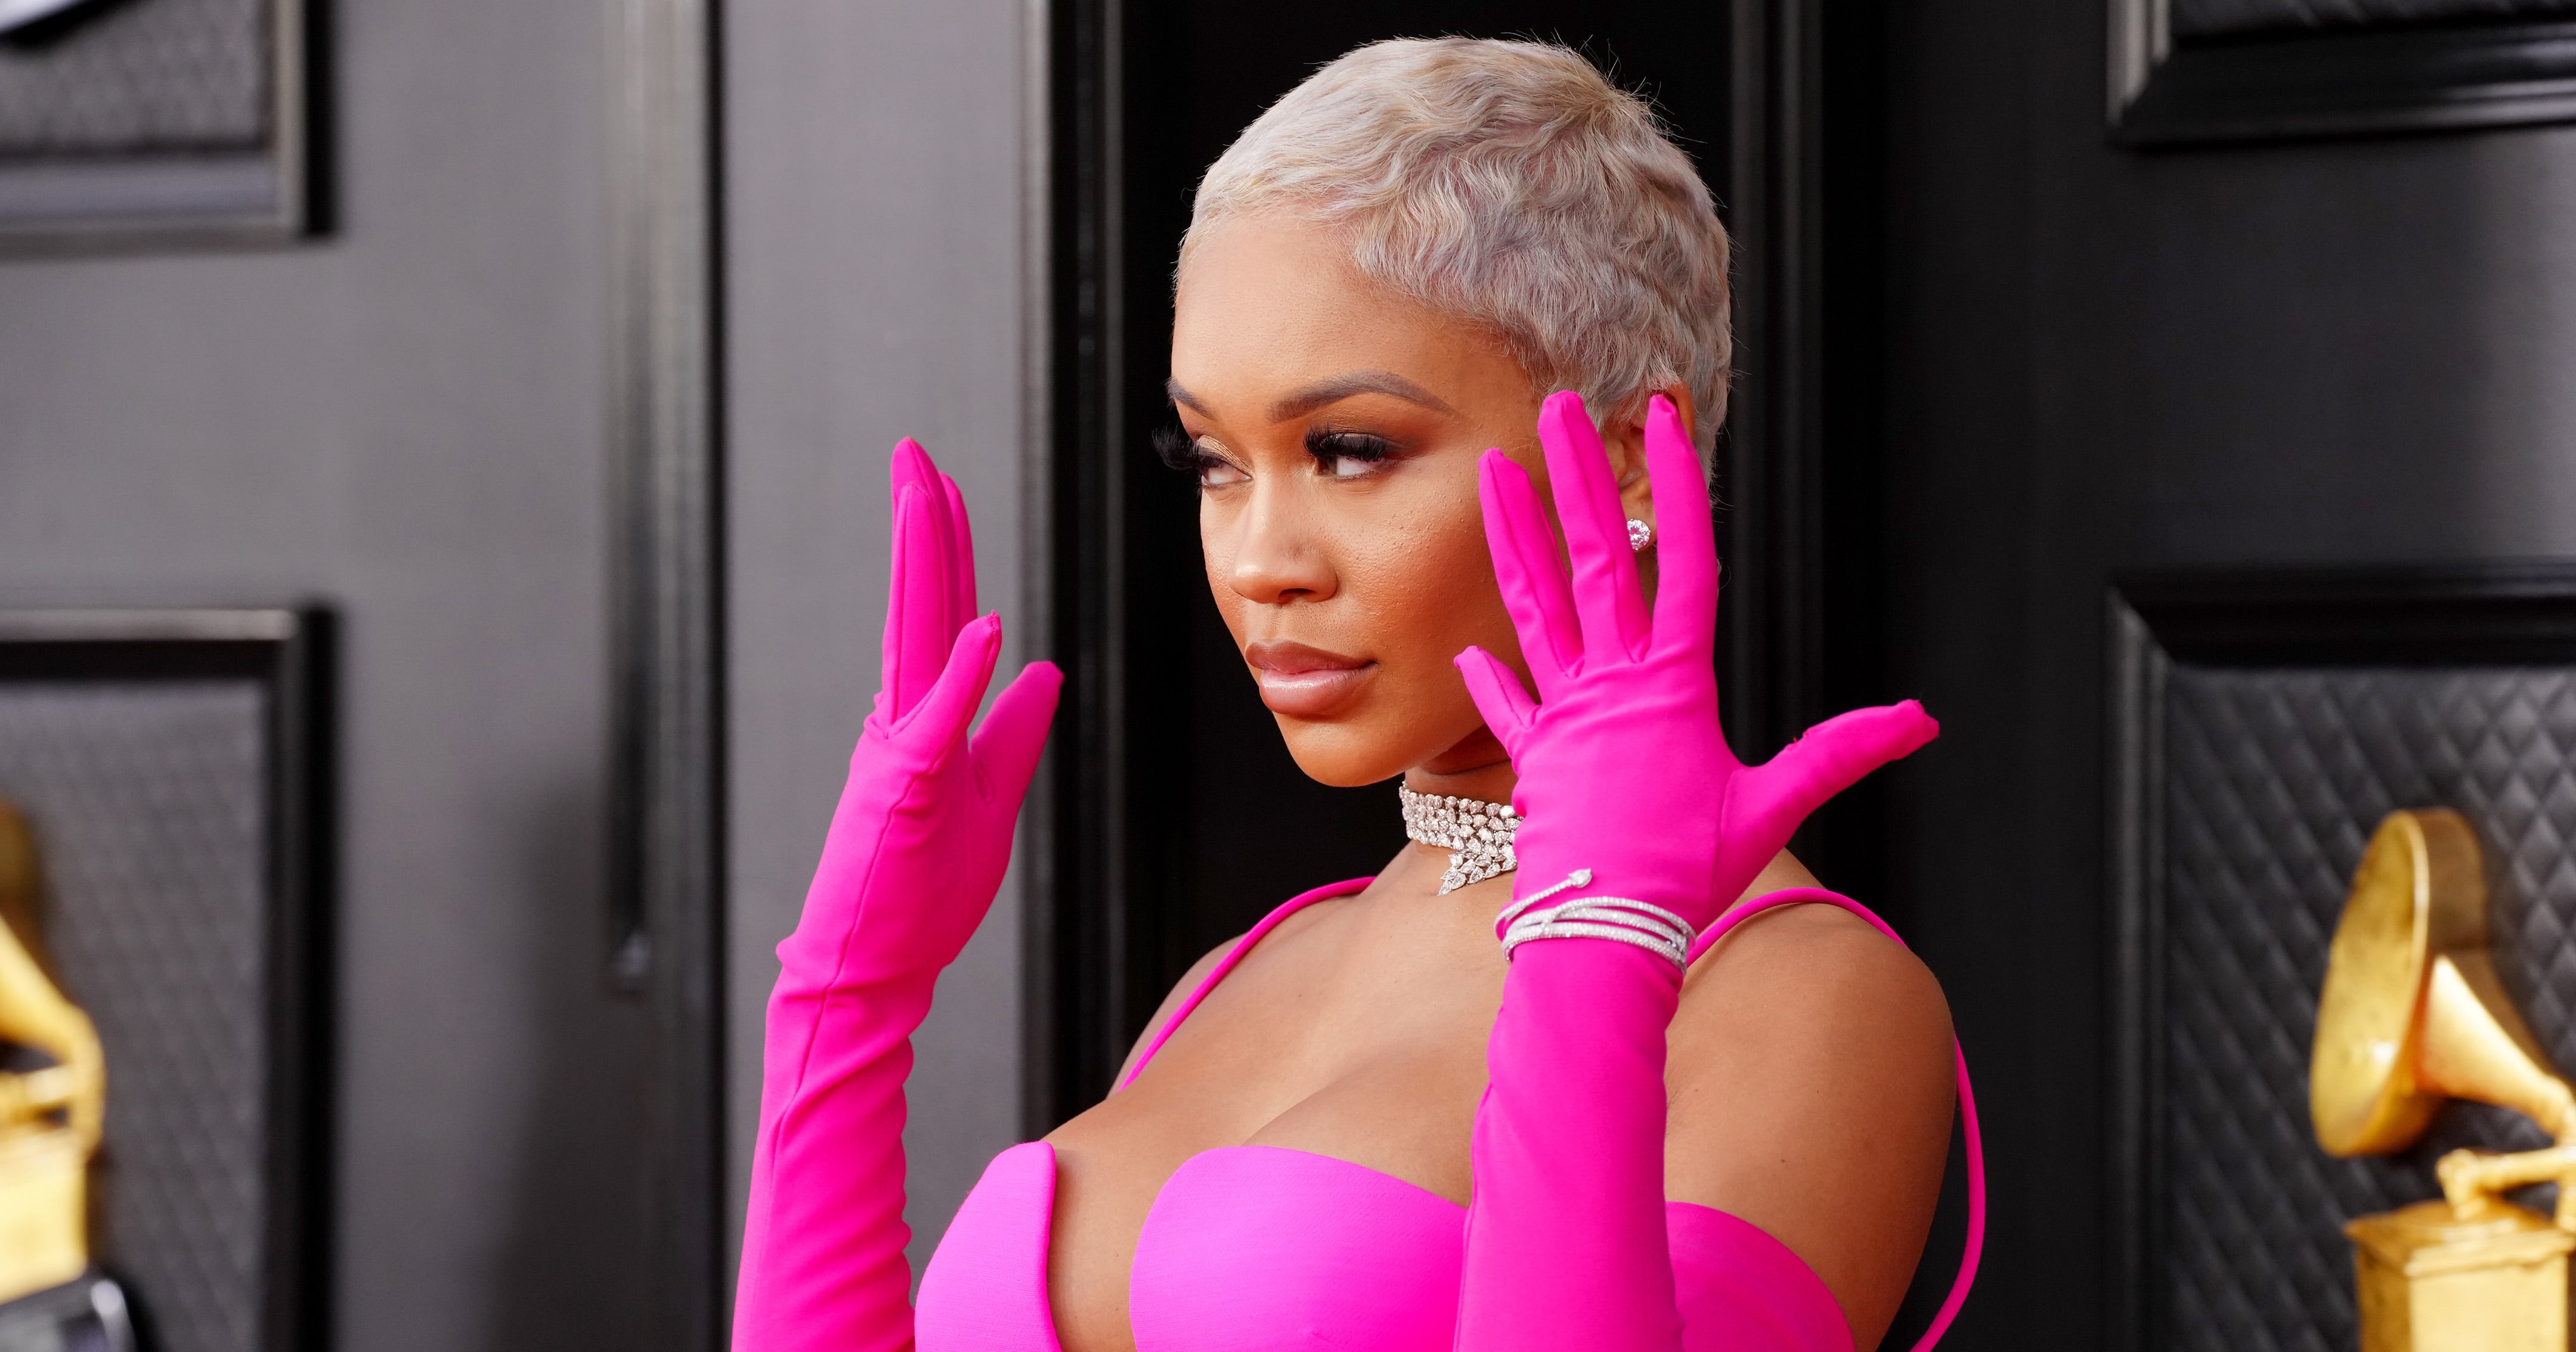 Trending: Celebs Are Using Gloves To Upgrade Party Outfits